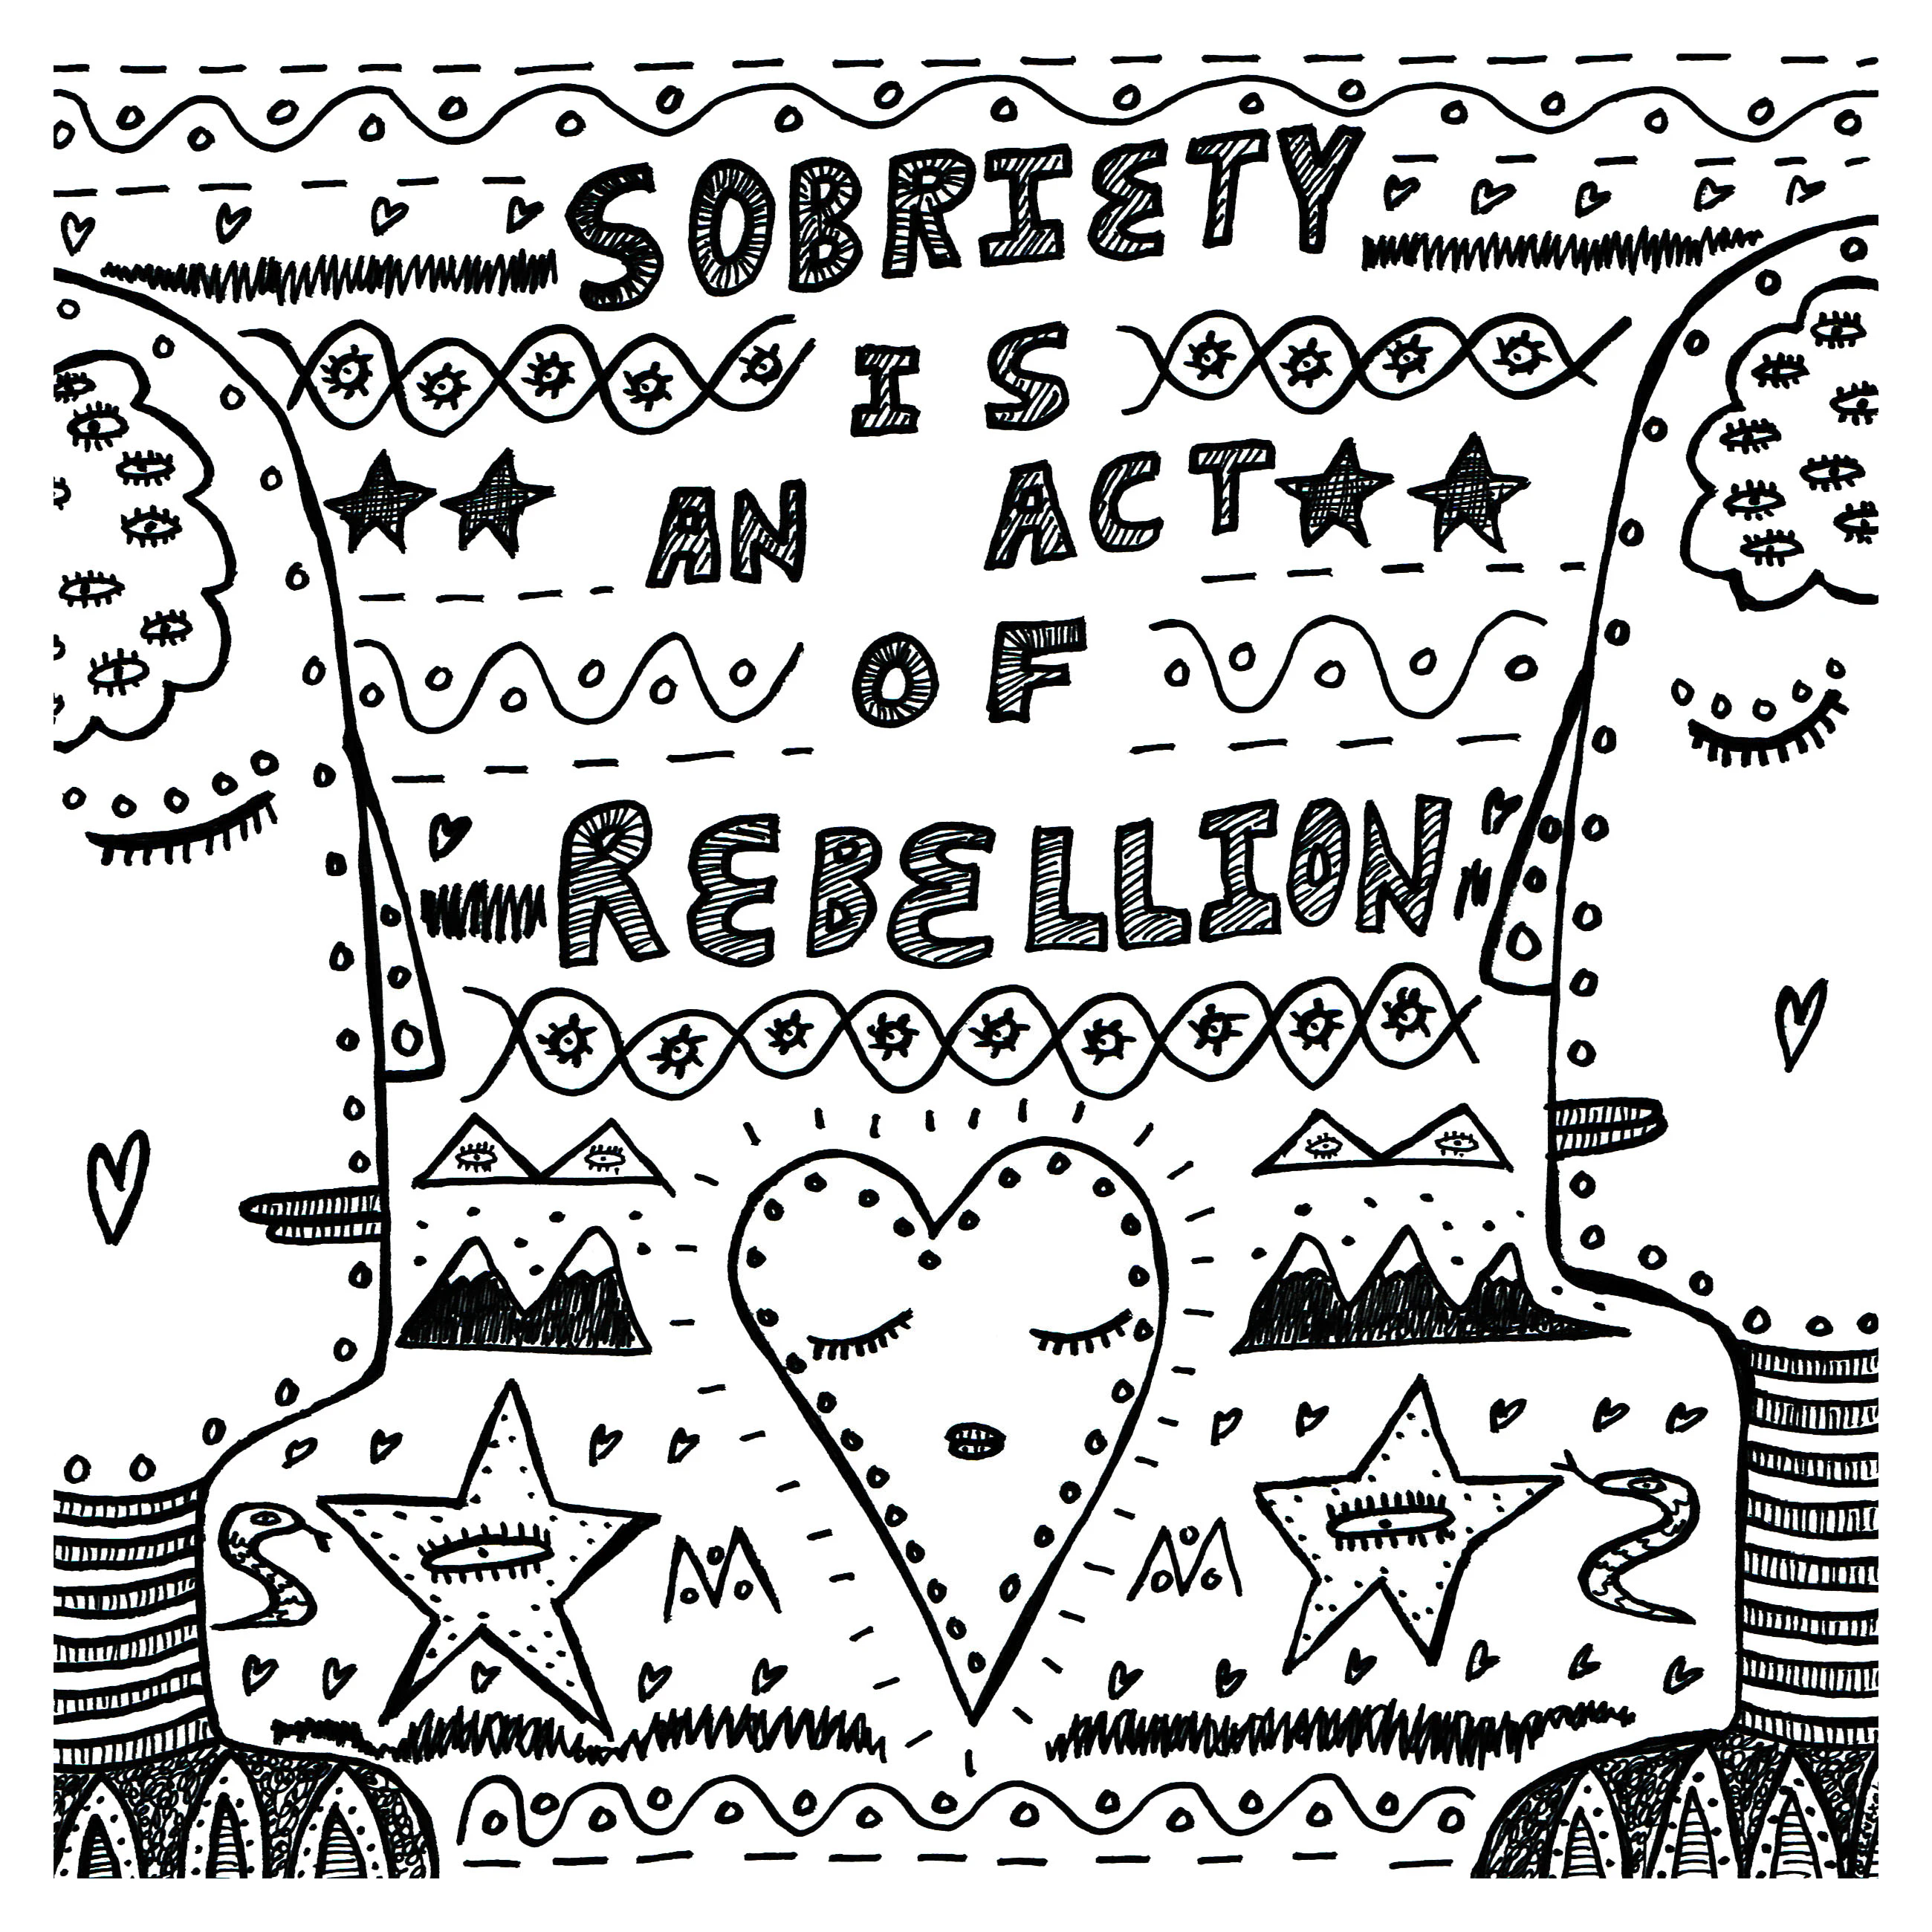 Sobriety is an act of rebellion